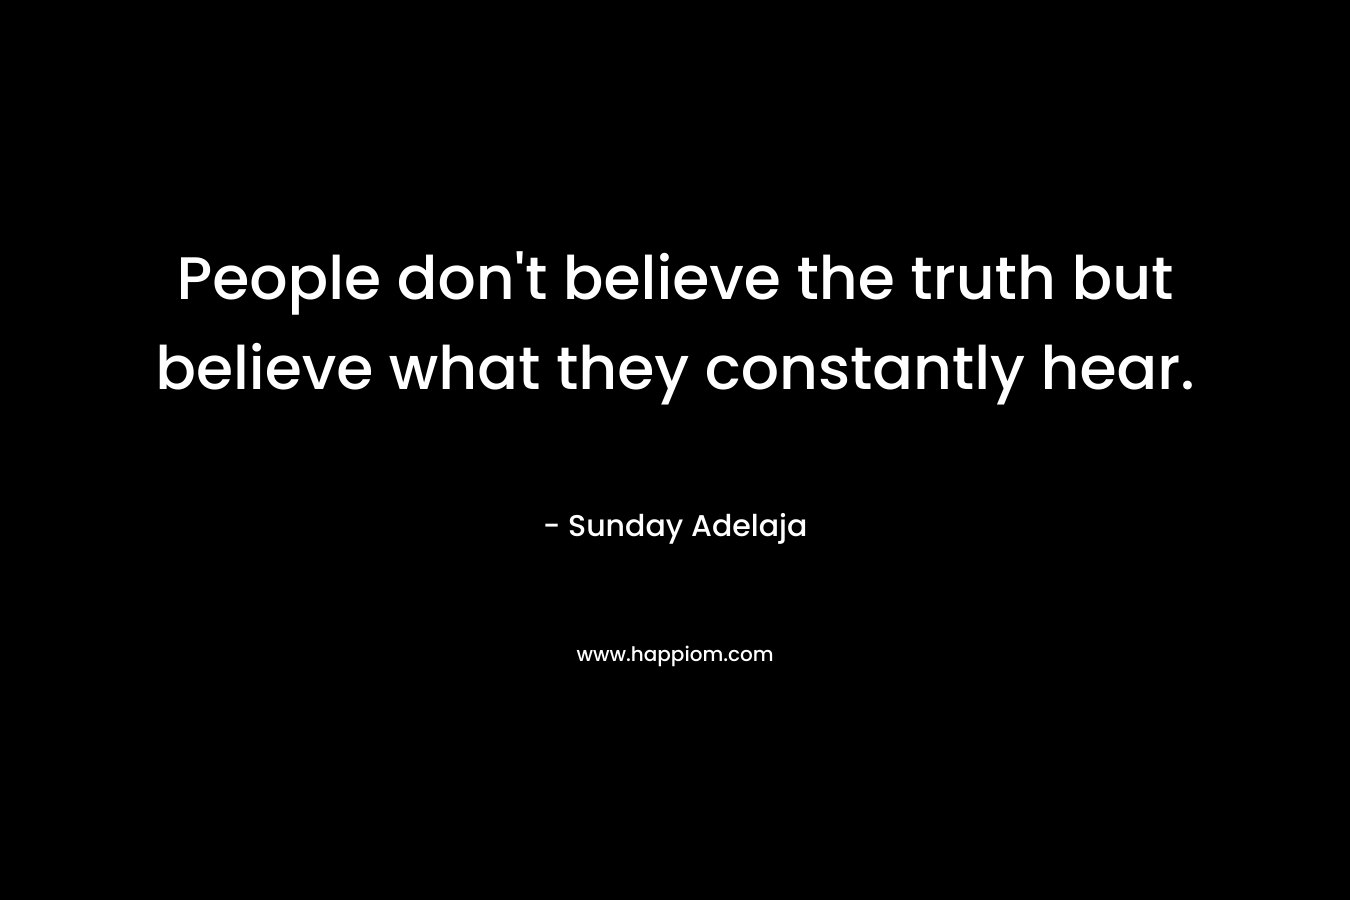 People don't believe the truth but believe what they constantly hear.